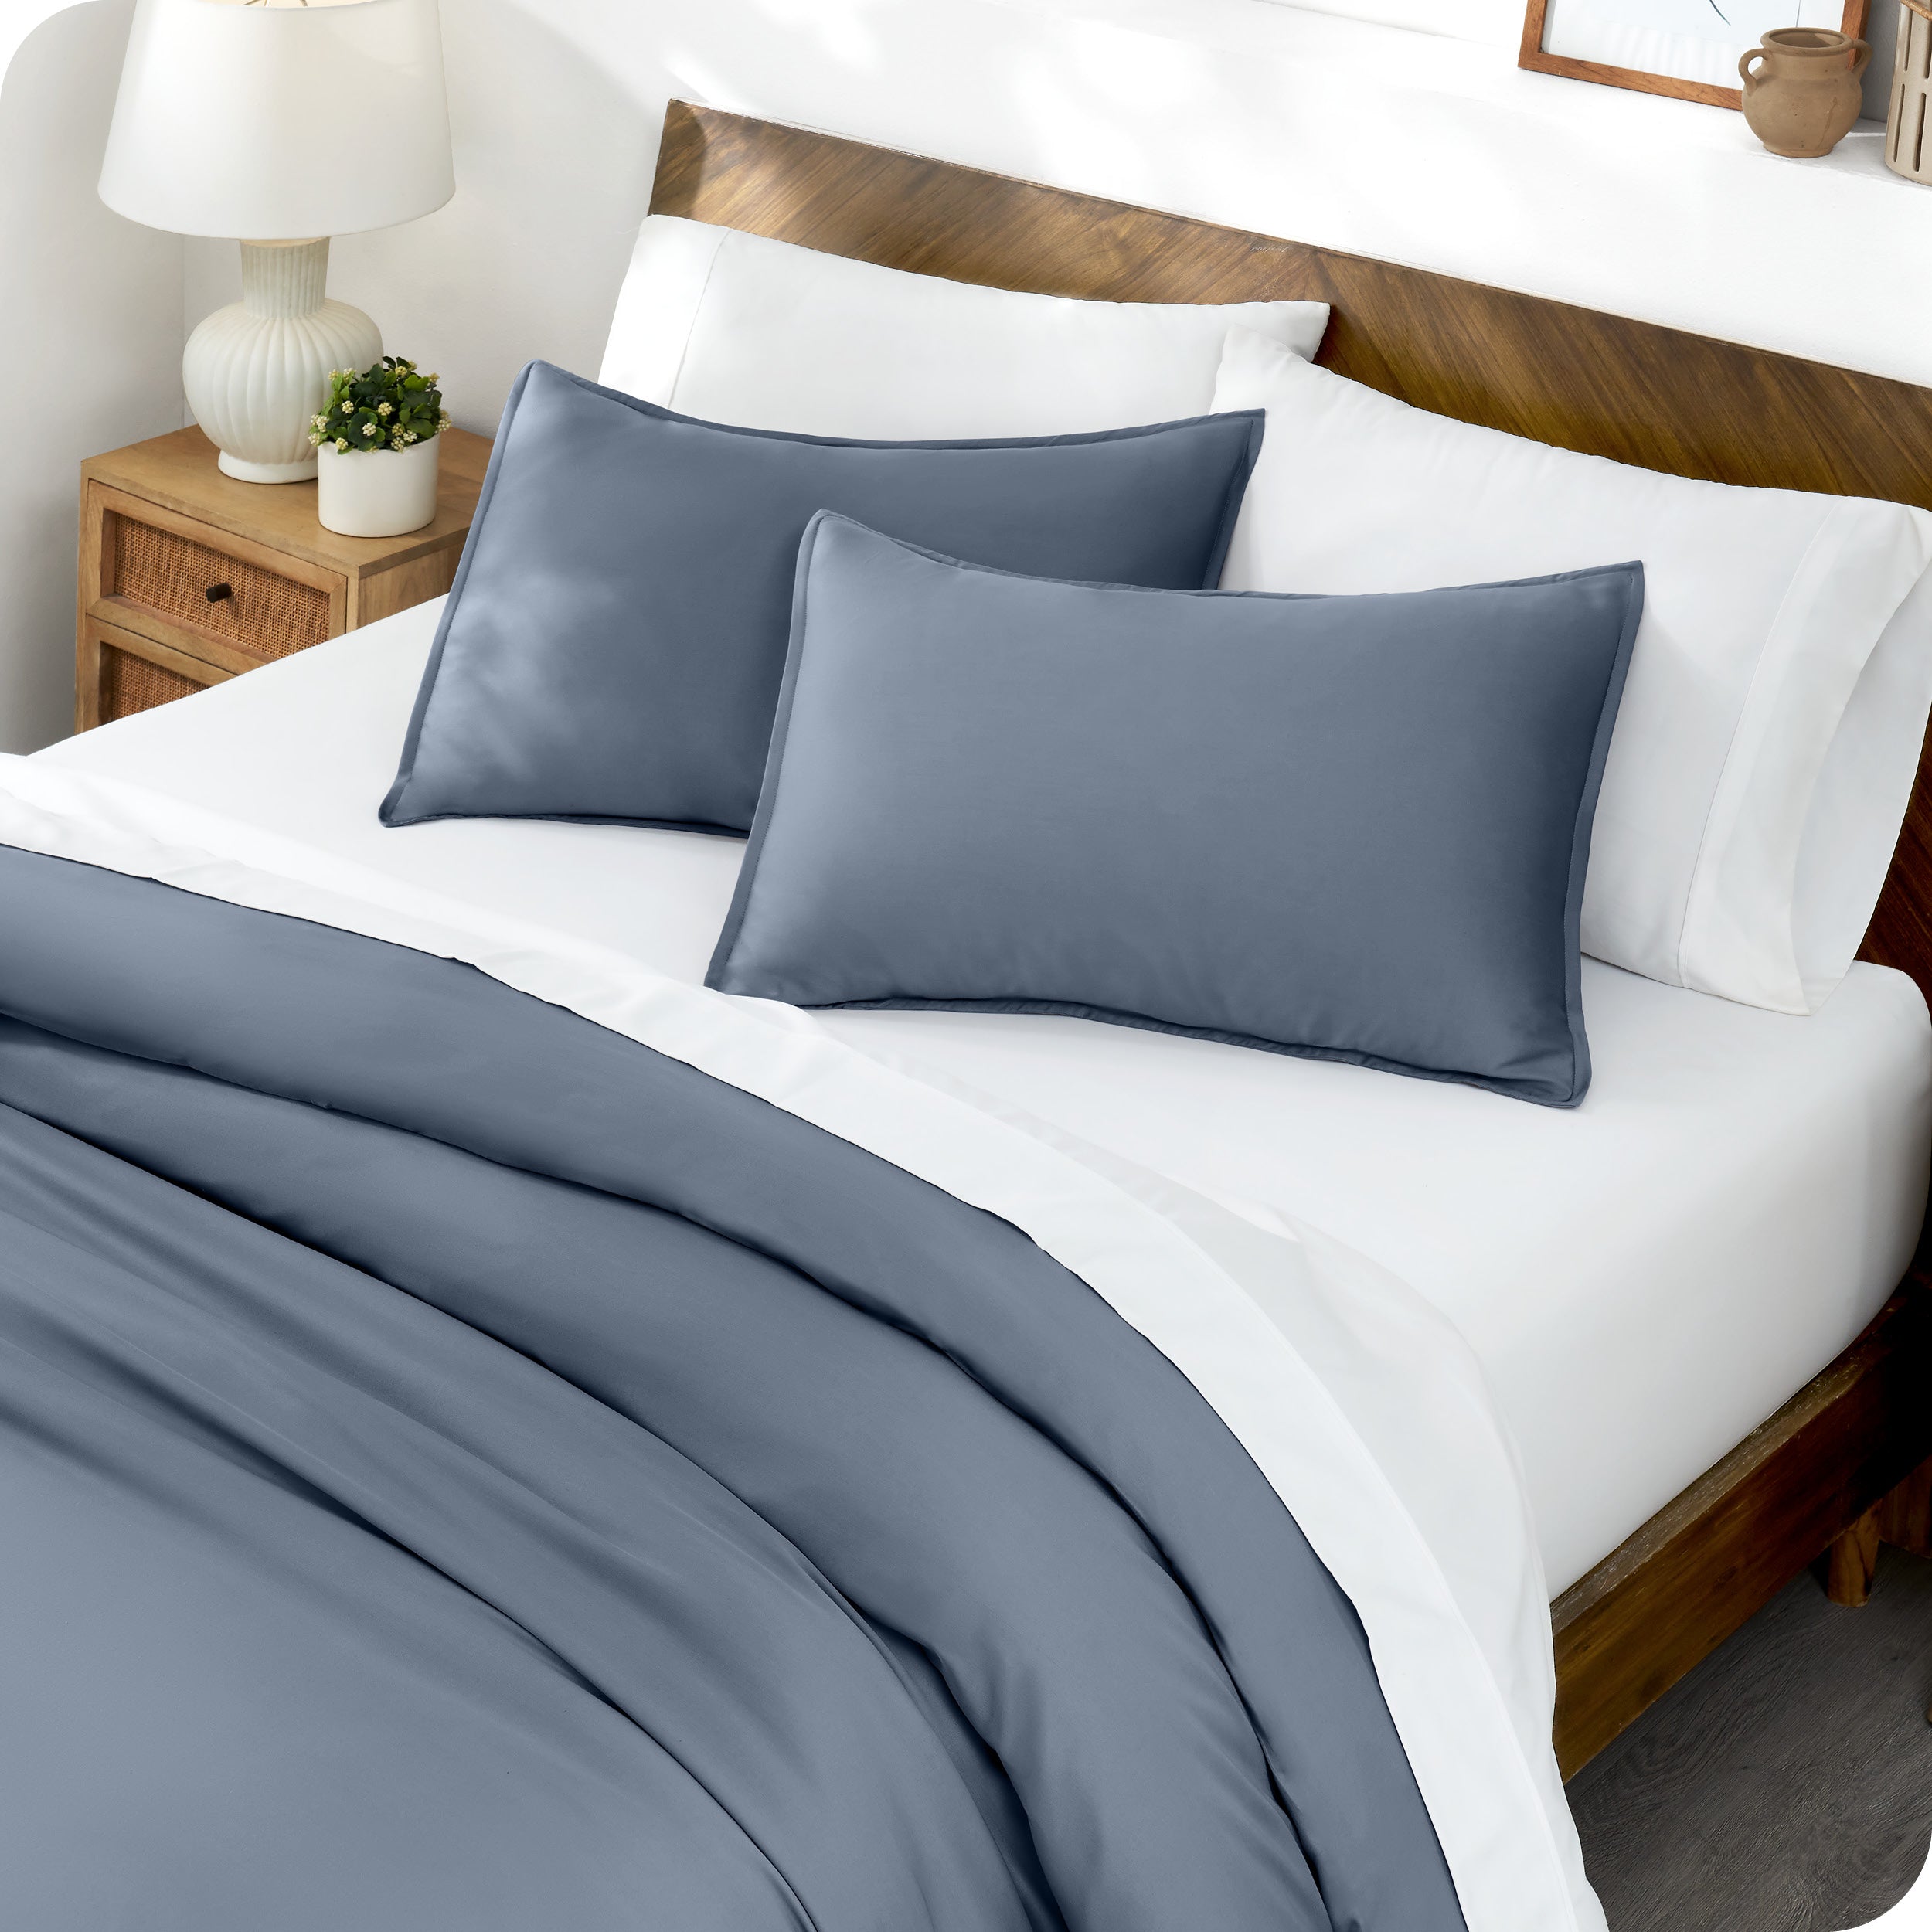 Matching TENCEL™ duvet cover and pillow shams on a bed